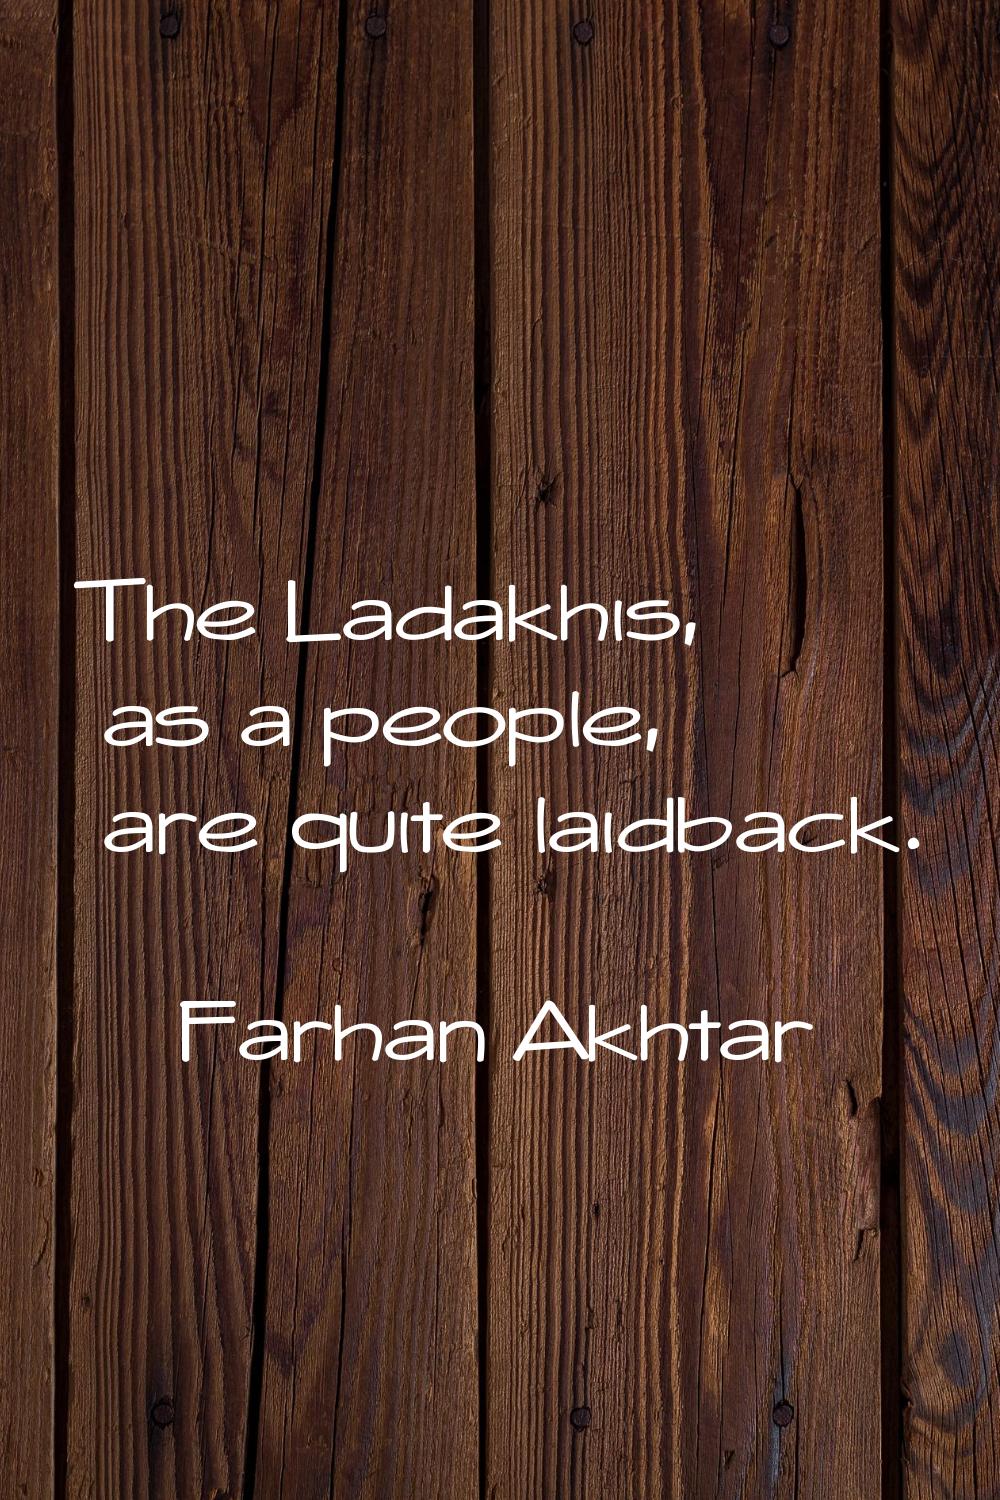 The Ladakhis, as a people, are quite laidback.